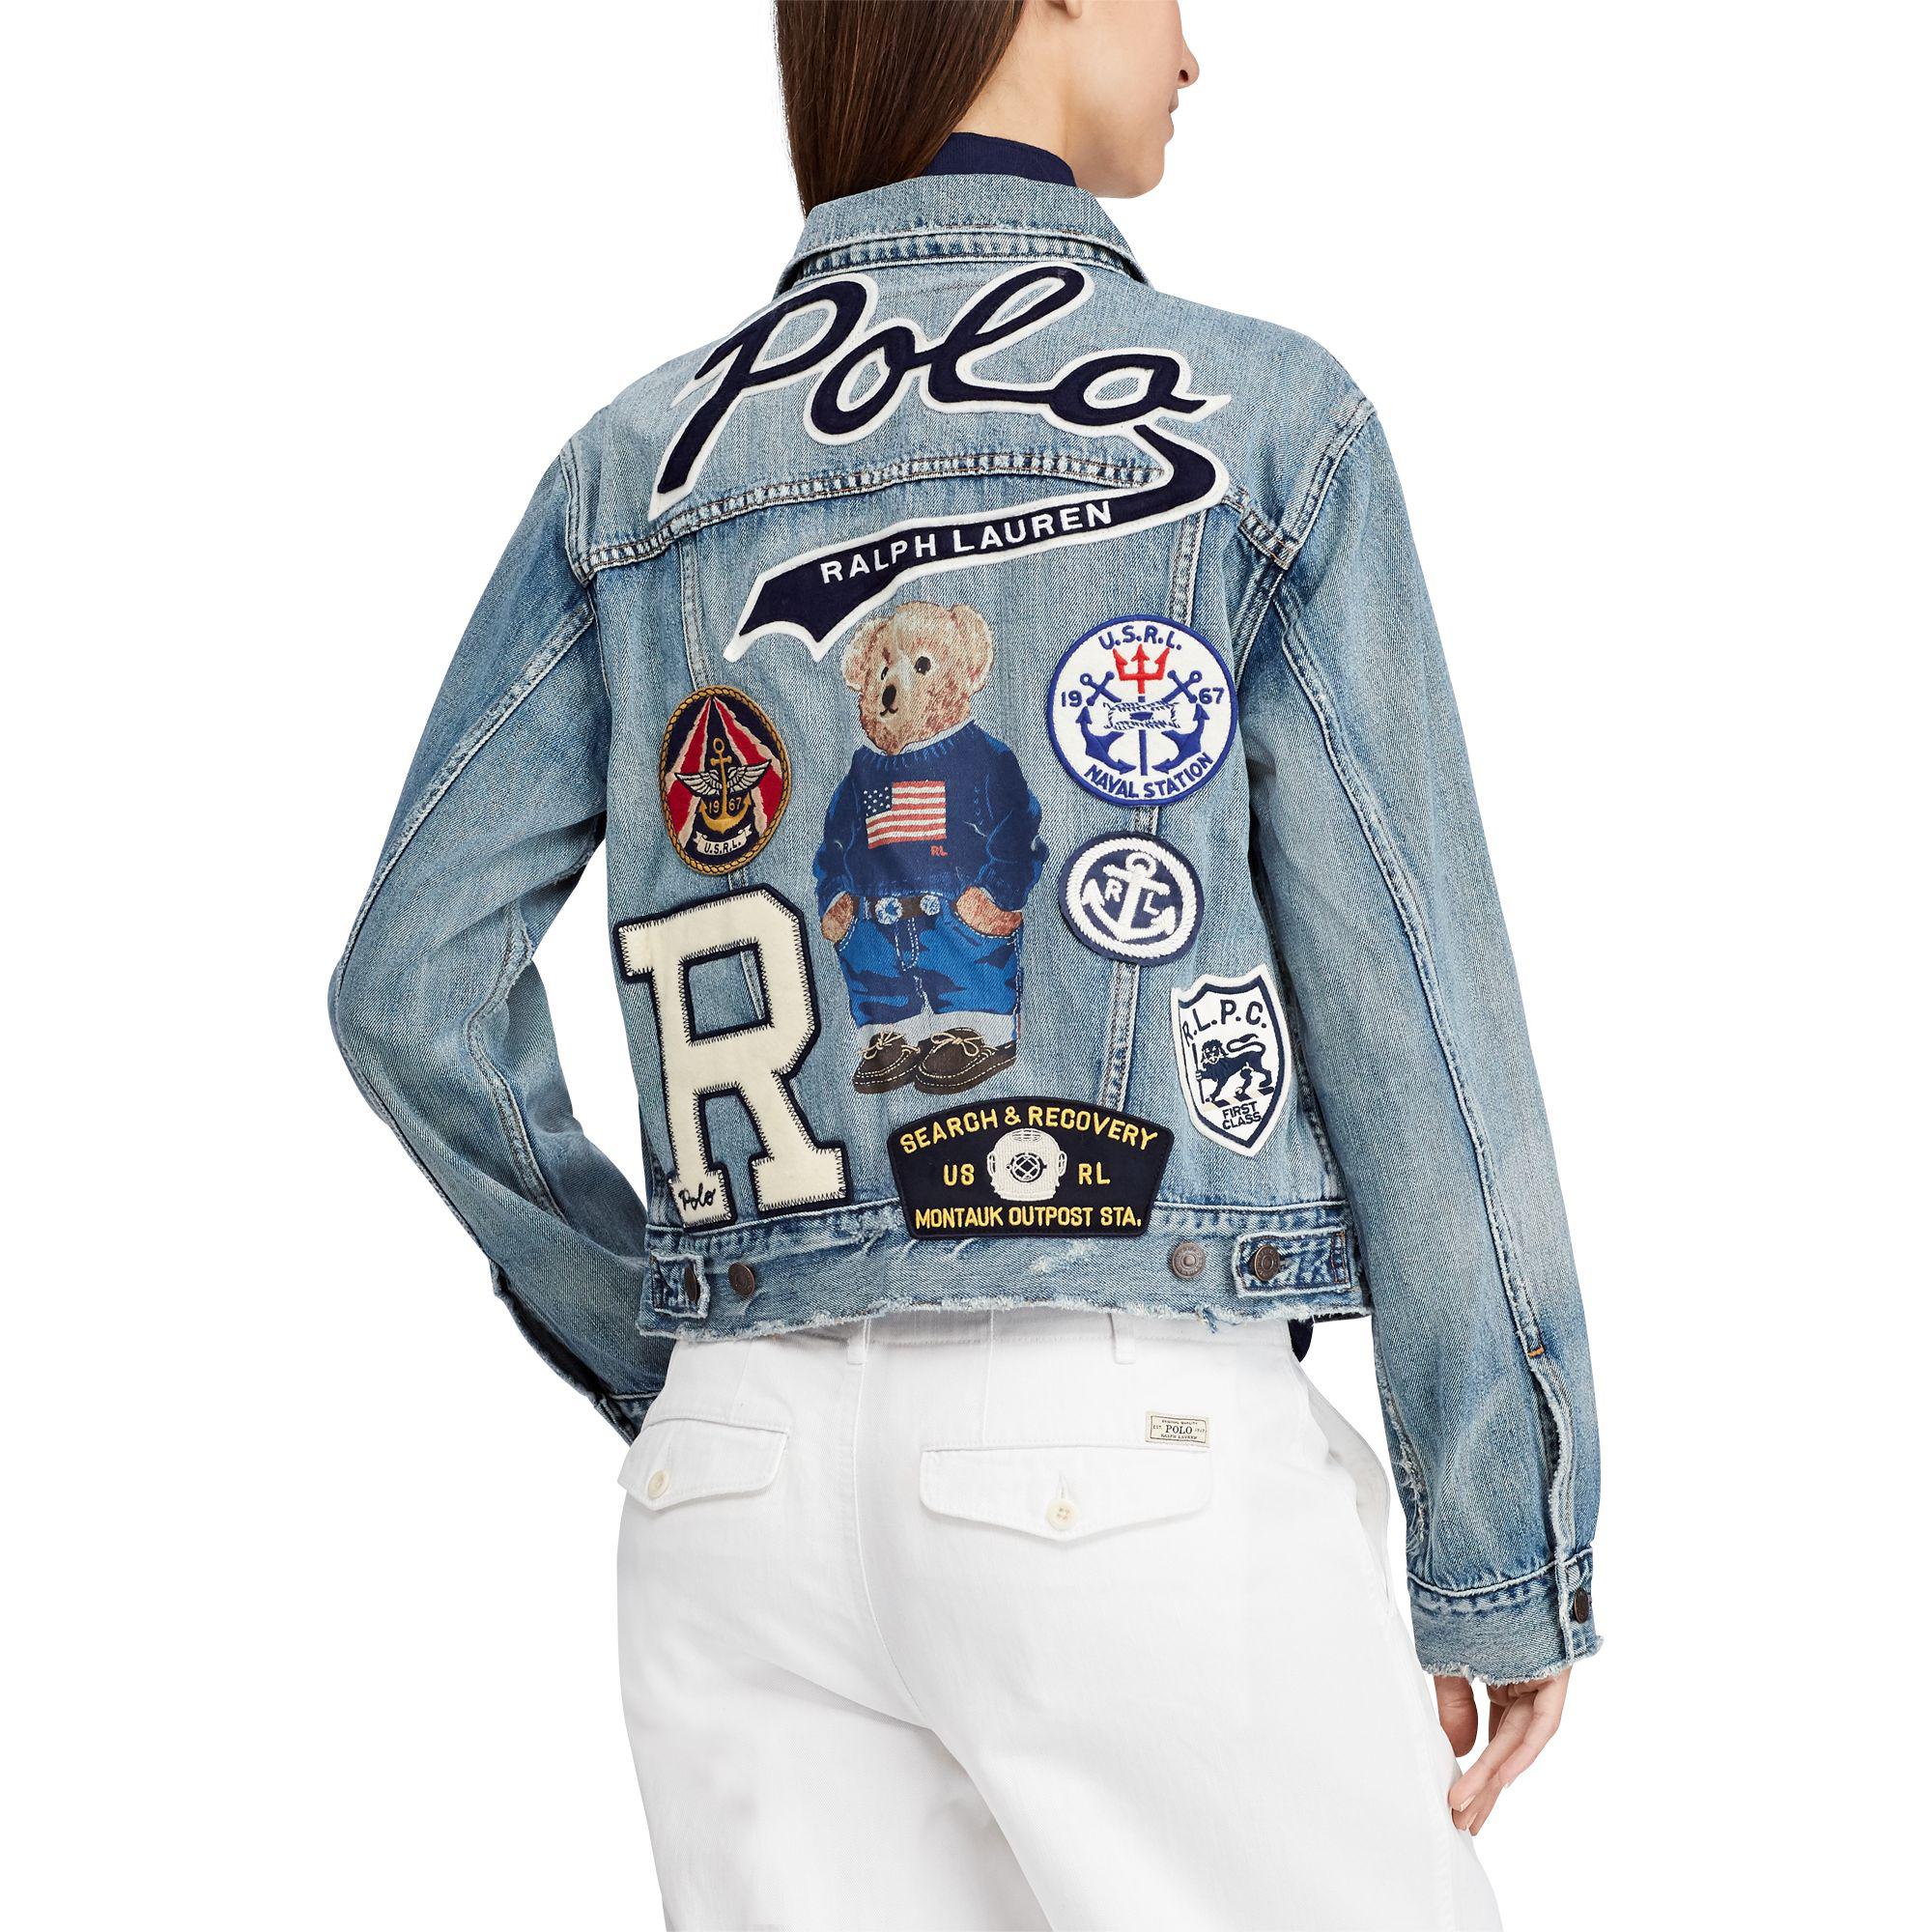 Polo Ralph Lauren Denim Jacket With Patches Online, SAVE 51% - icarus.photos